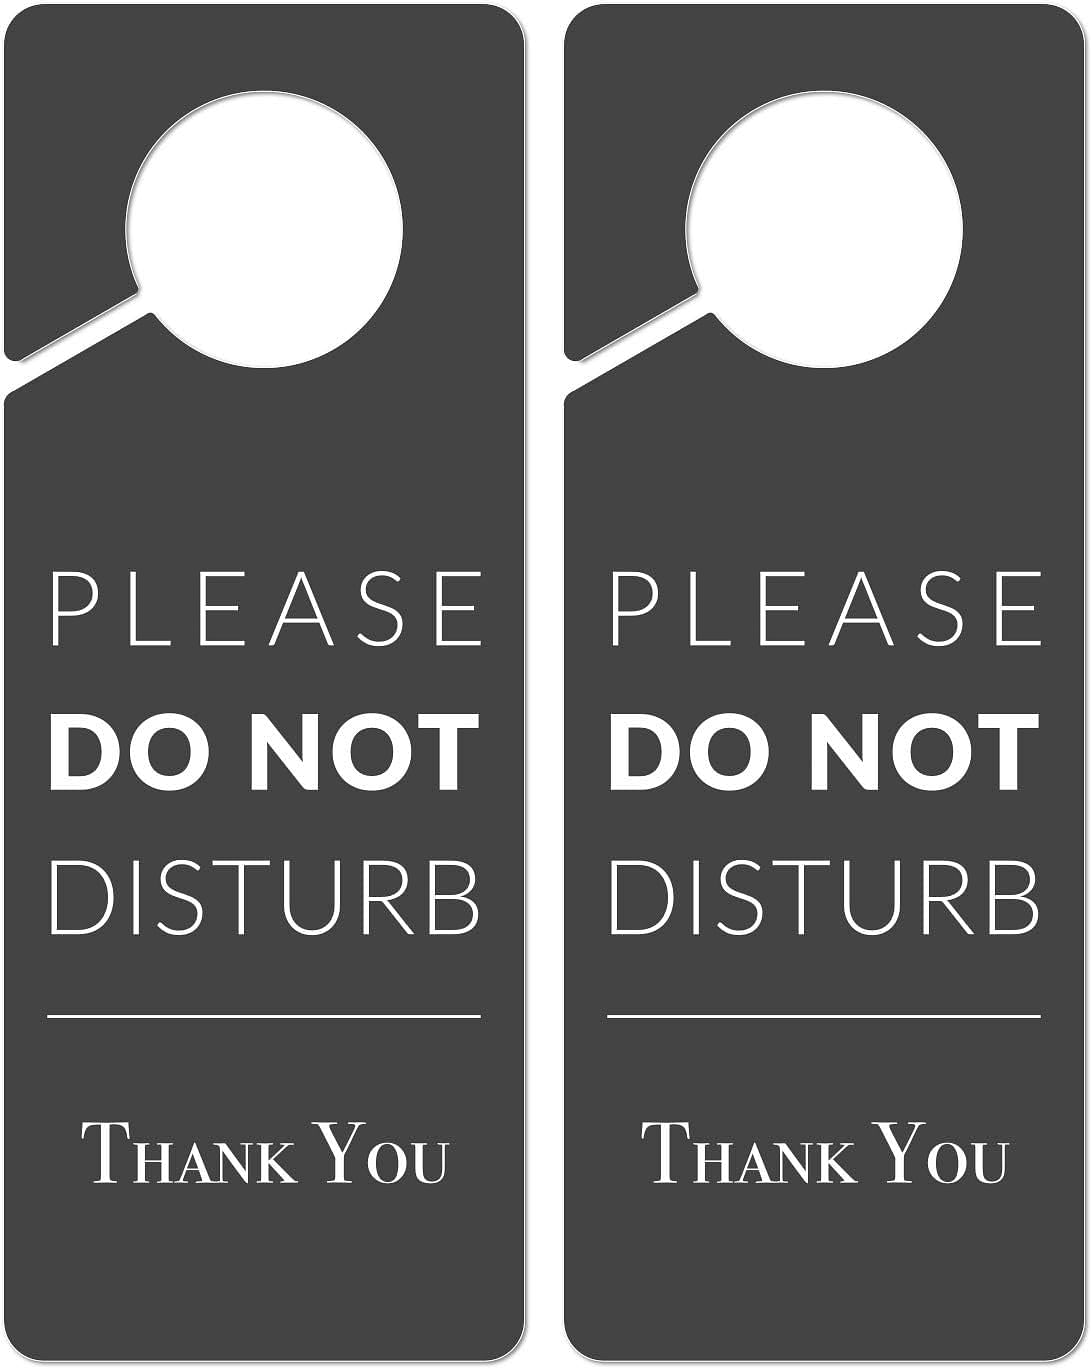 Do Not Disturb Door Hanger Sign, 2 Pack (Printed on Both Sides), 9.3″x3.5″PVC Plastic, Please Do Not Disturb Sign for Home, Office, Hotel, Bathroom, Bedroom, Pumping, Breastfeeding, Therapists, Clinic